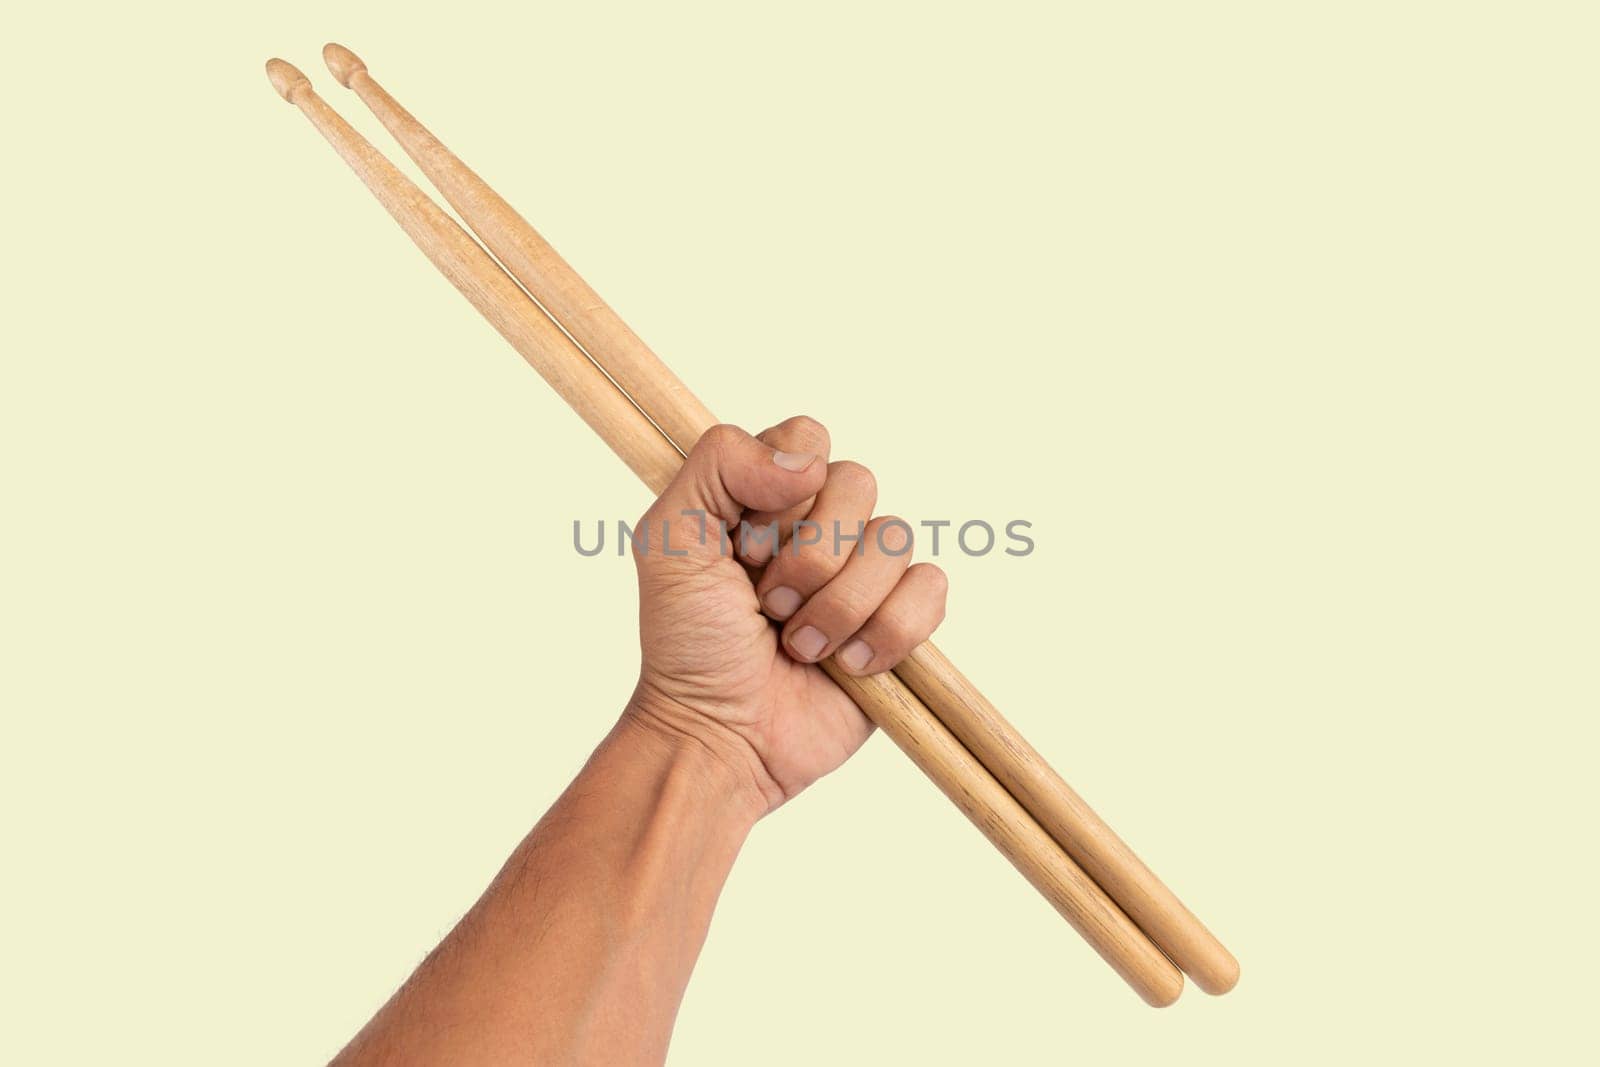 Black male hand holding wooden Drum sticks isolated on green background by TropicalNinjaStudio